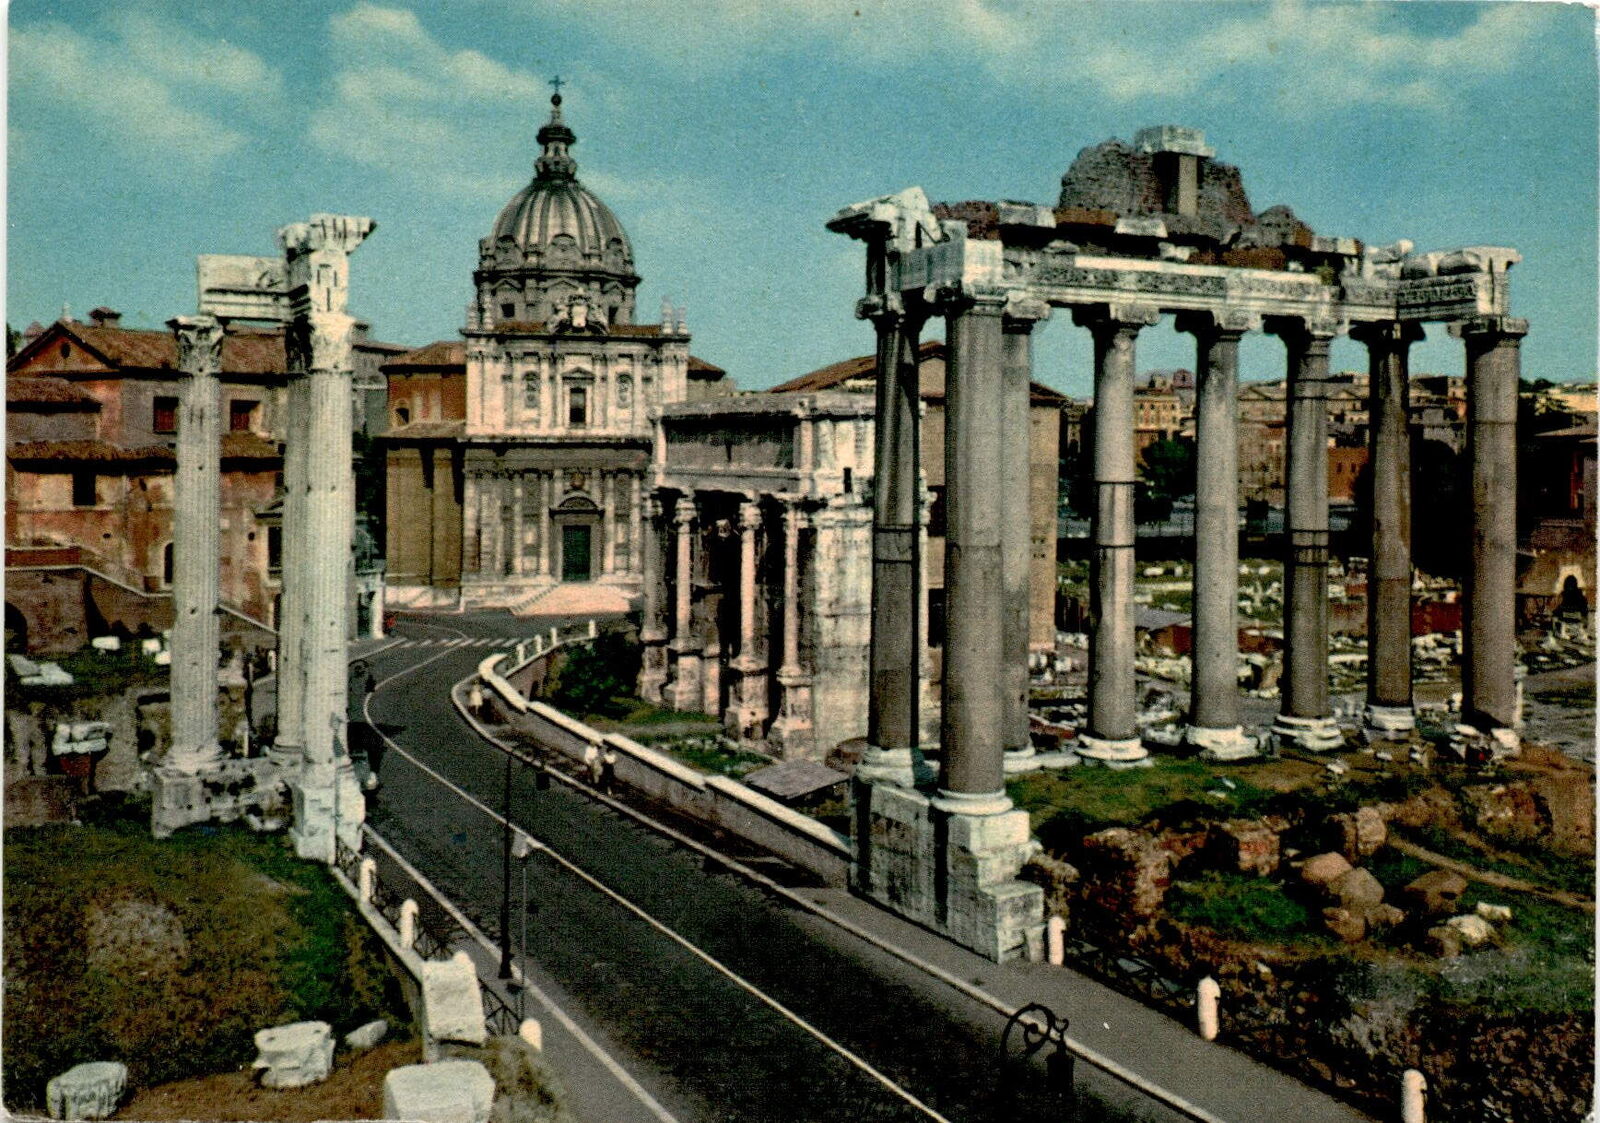 Foro Romano Vintage Postcard: Capturing History in 217 Languages